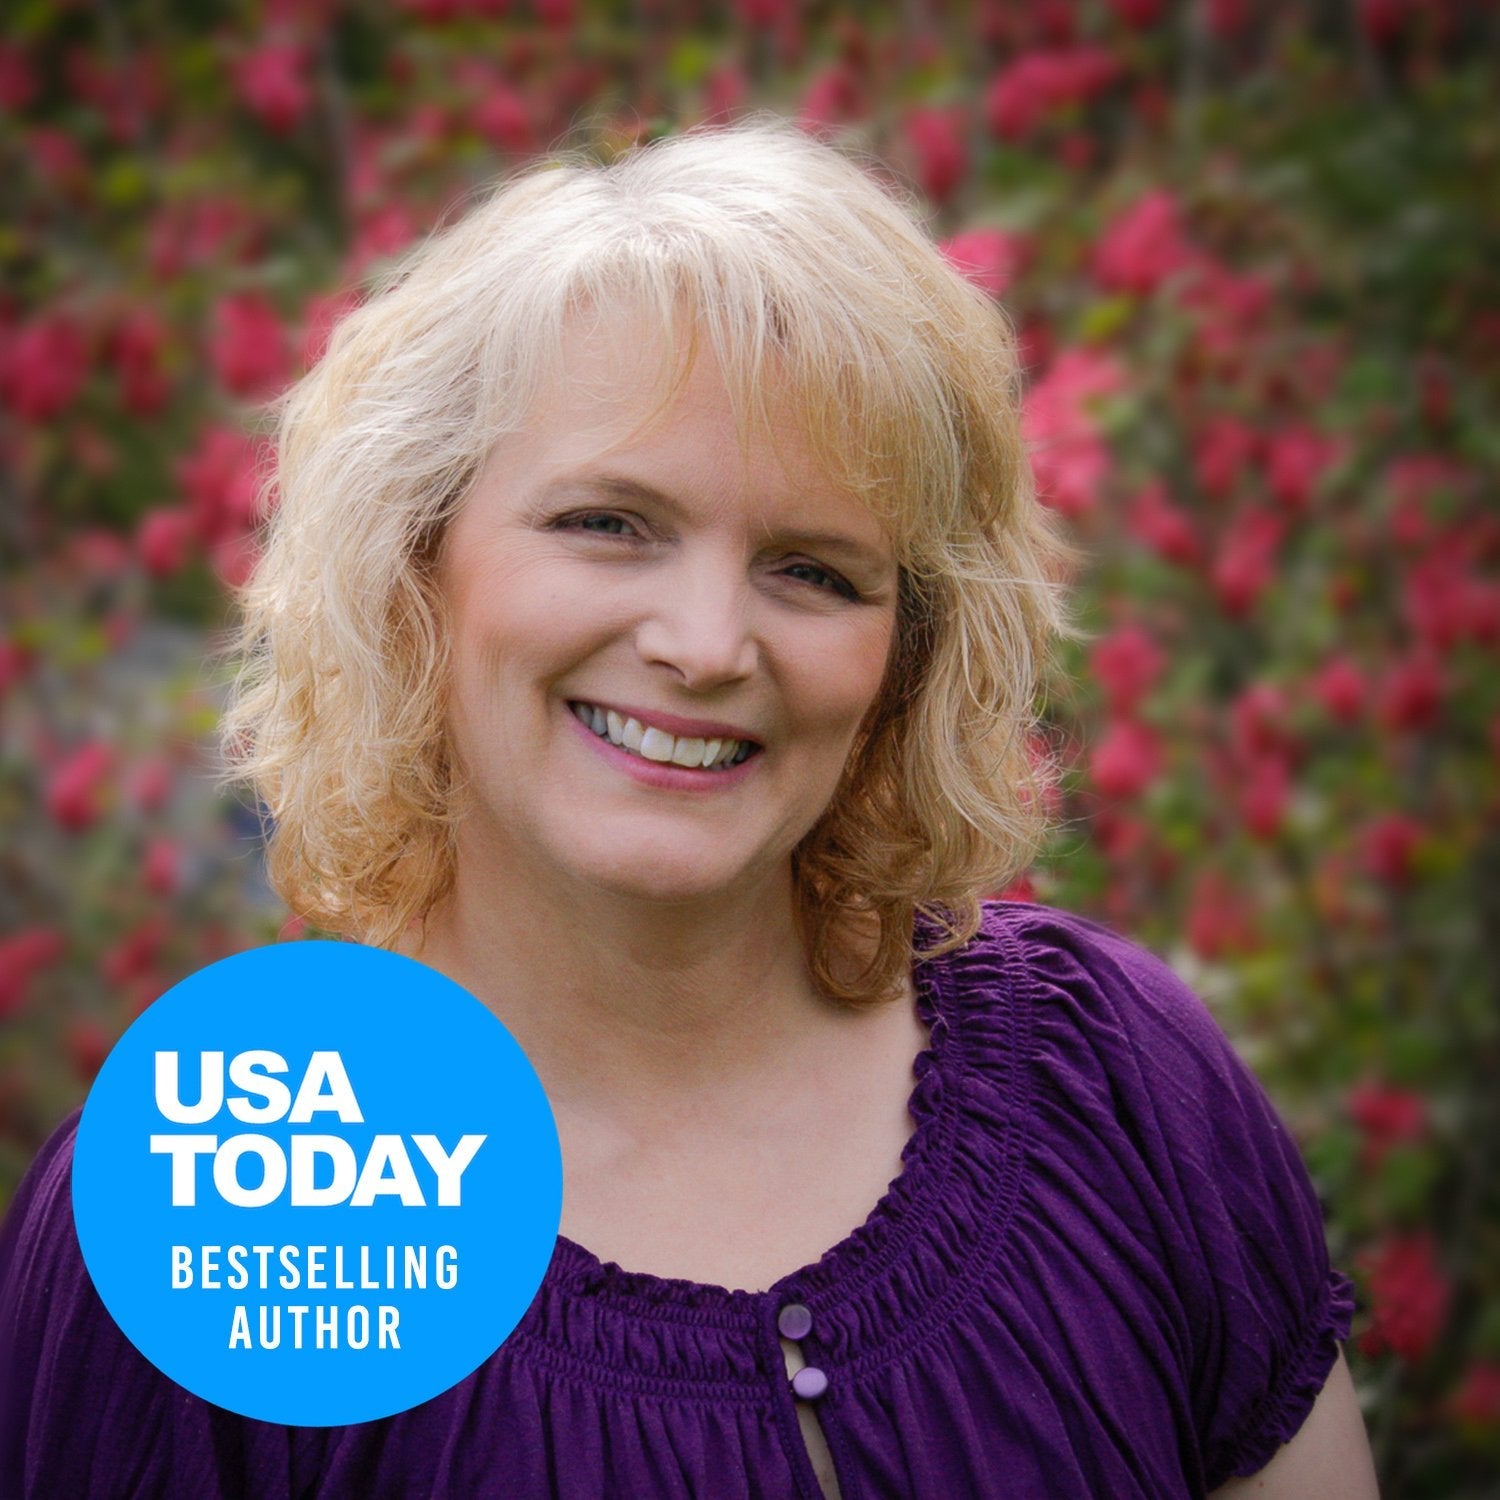 USA Today Bestselling Author, Lynnette Bonner